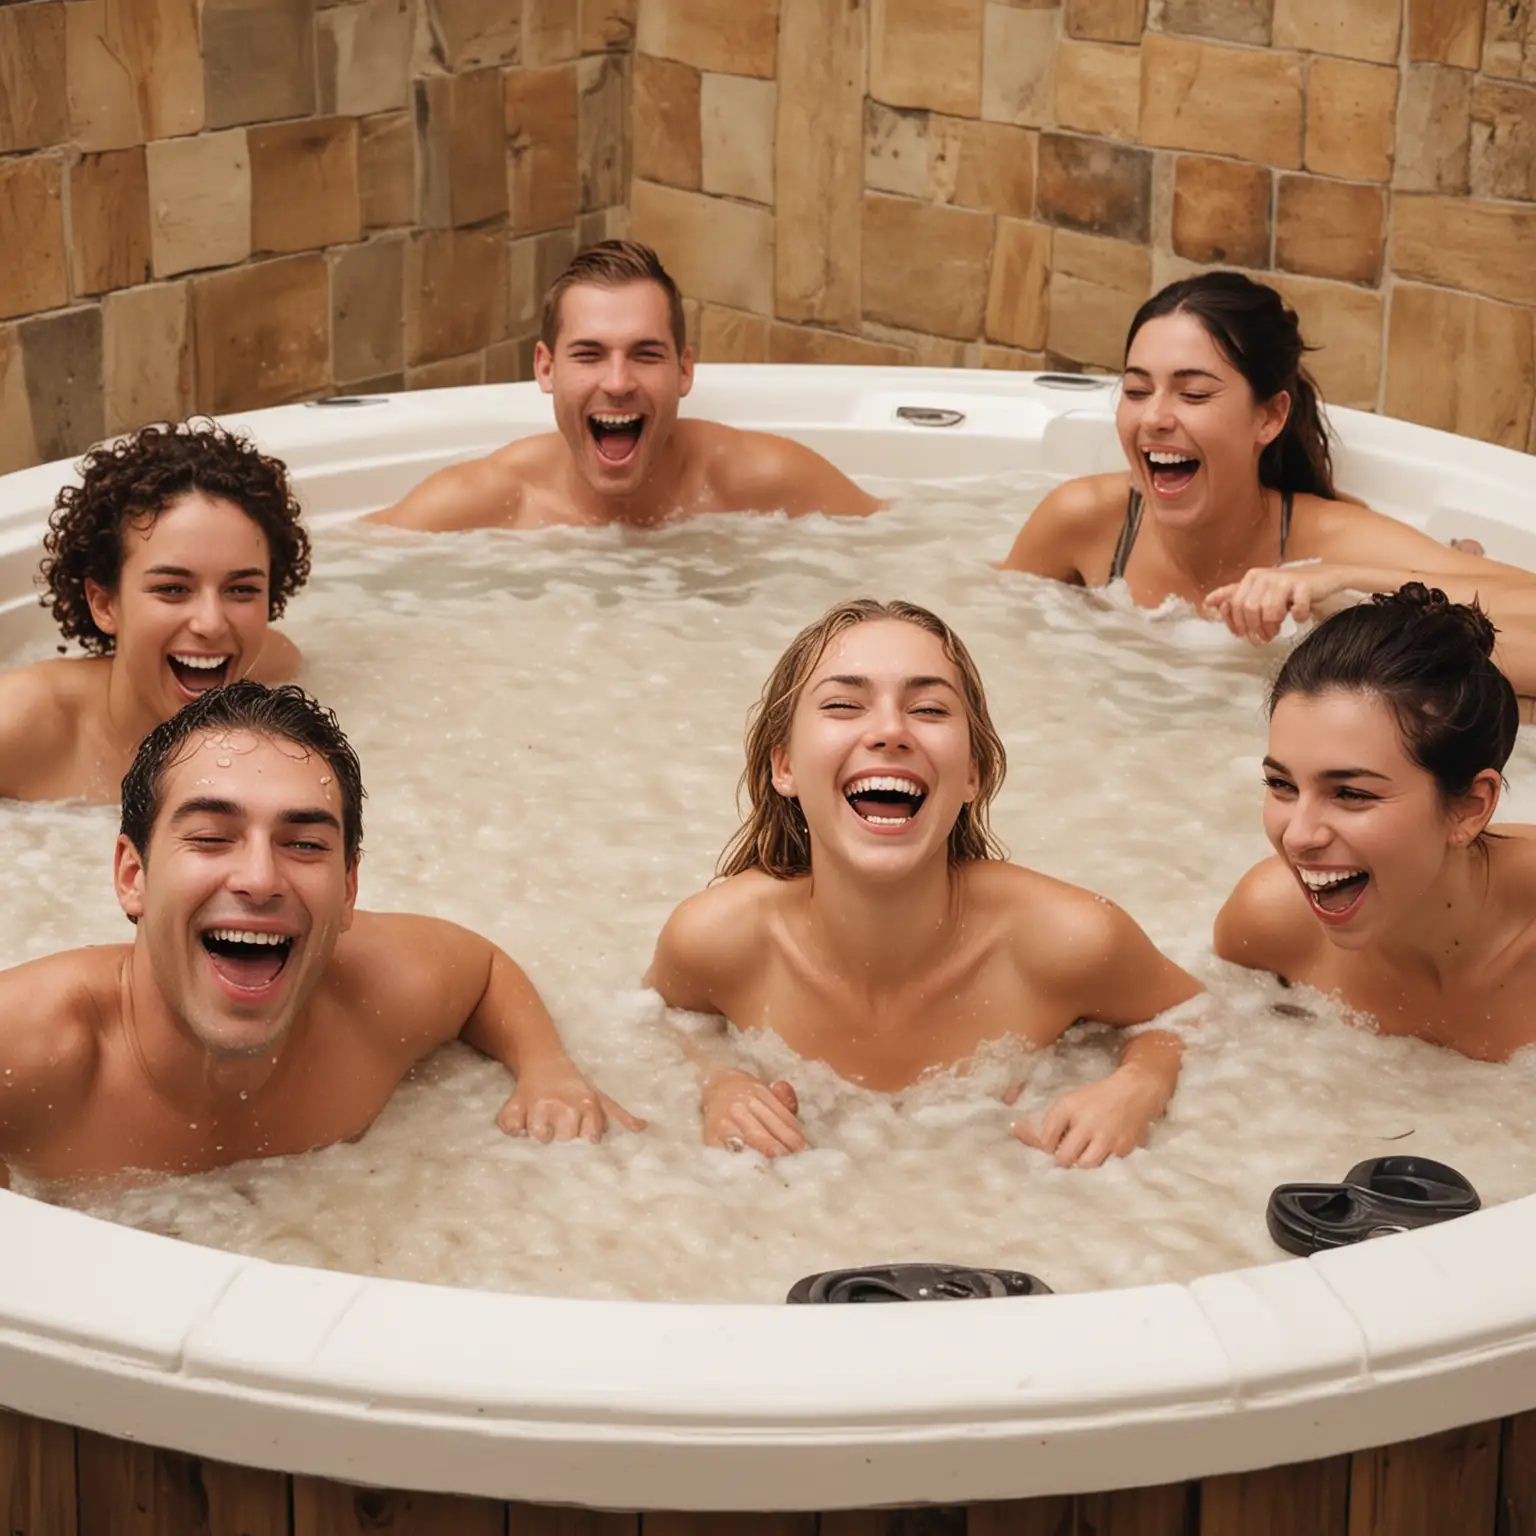 people laughing in a large hot tub full of oatmeal